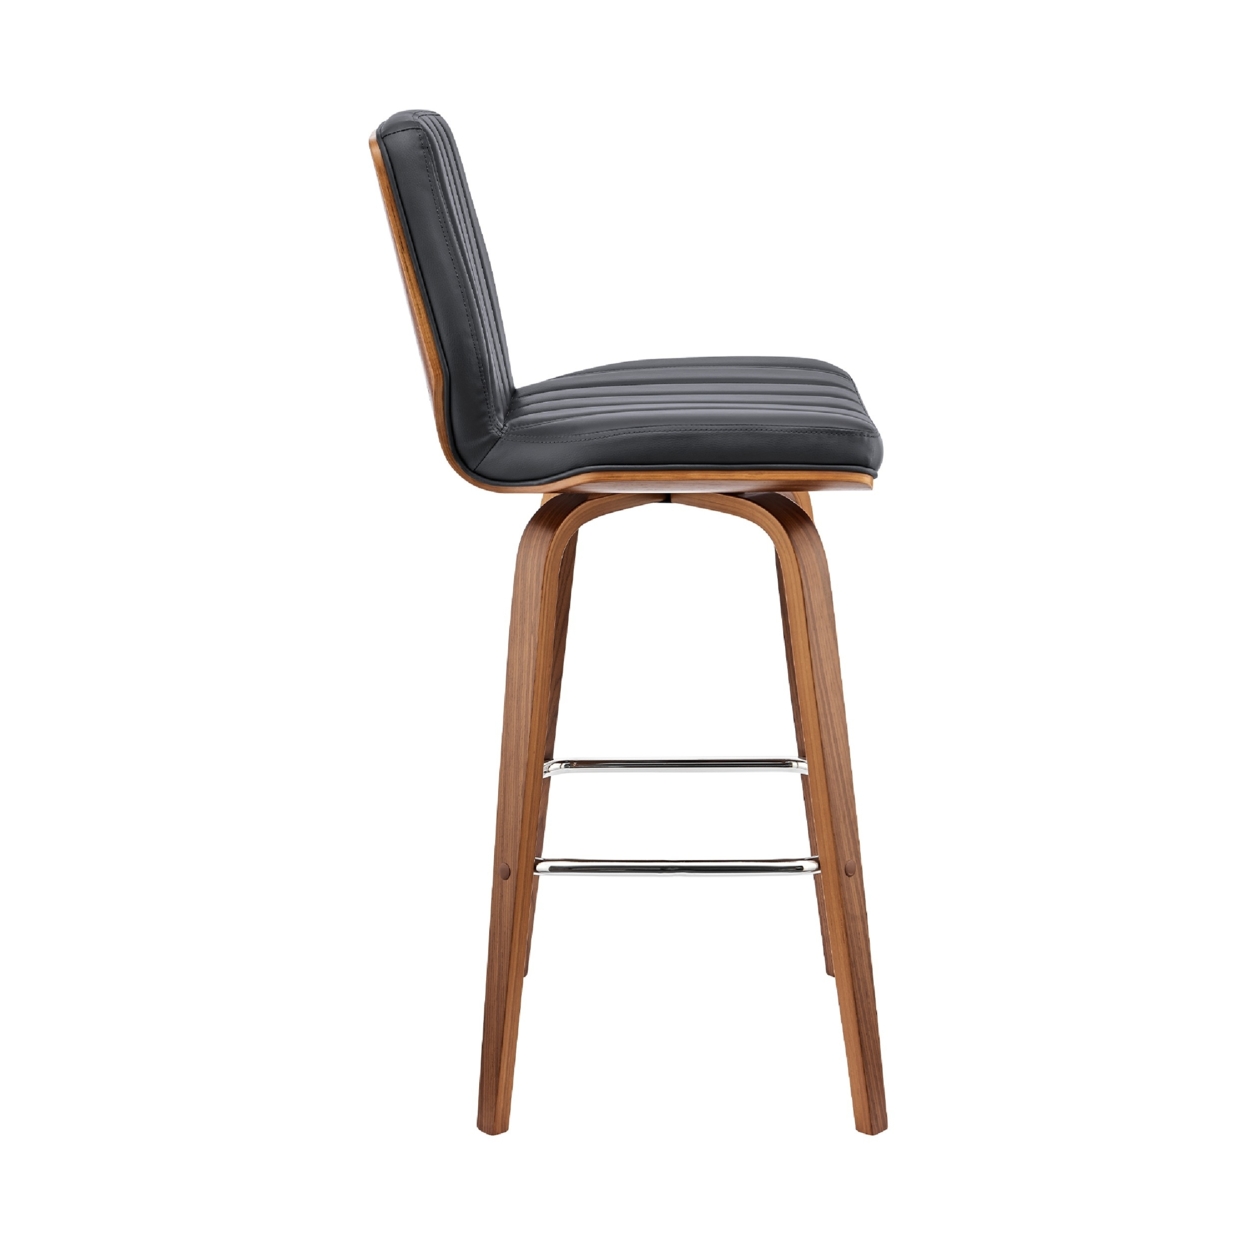 Swivel Barstool With Channel Stitching And Wooden Support, Brown And Black- Saltoro Sherpi